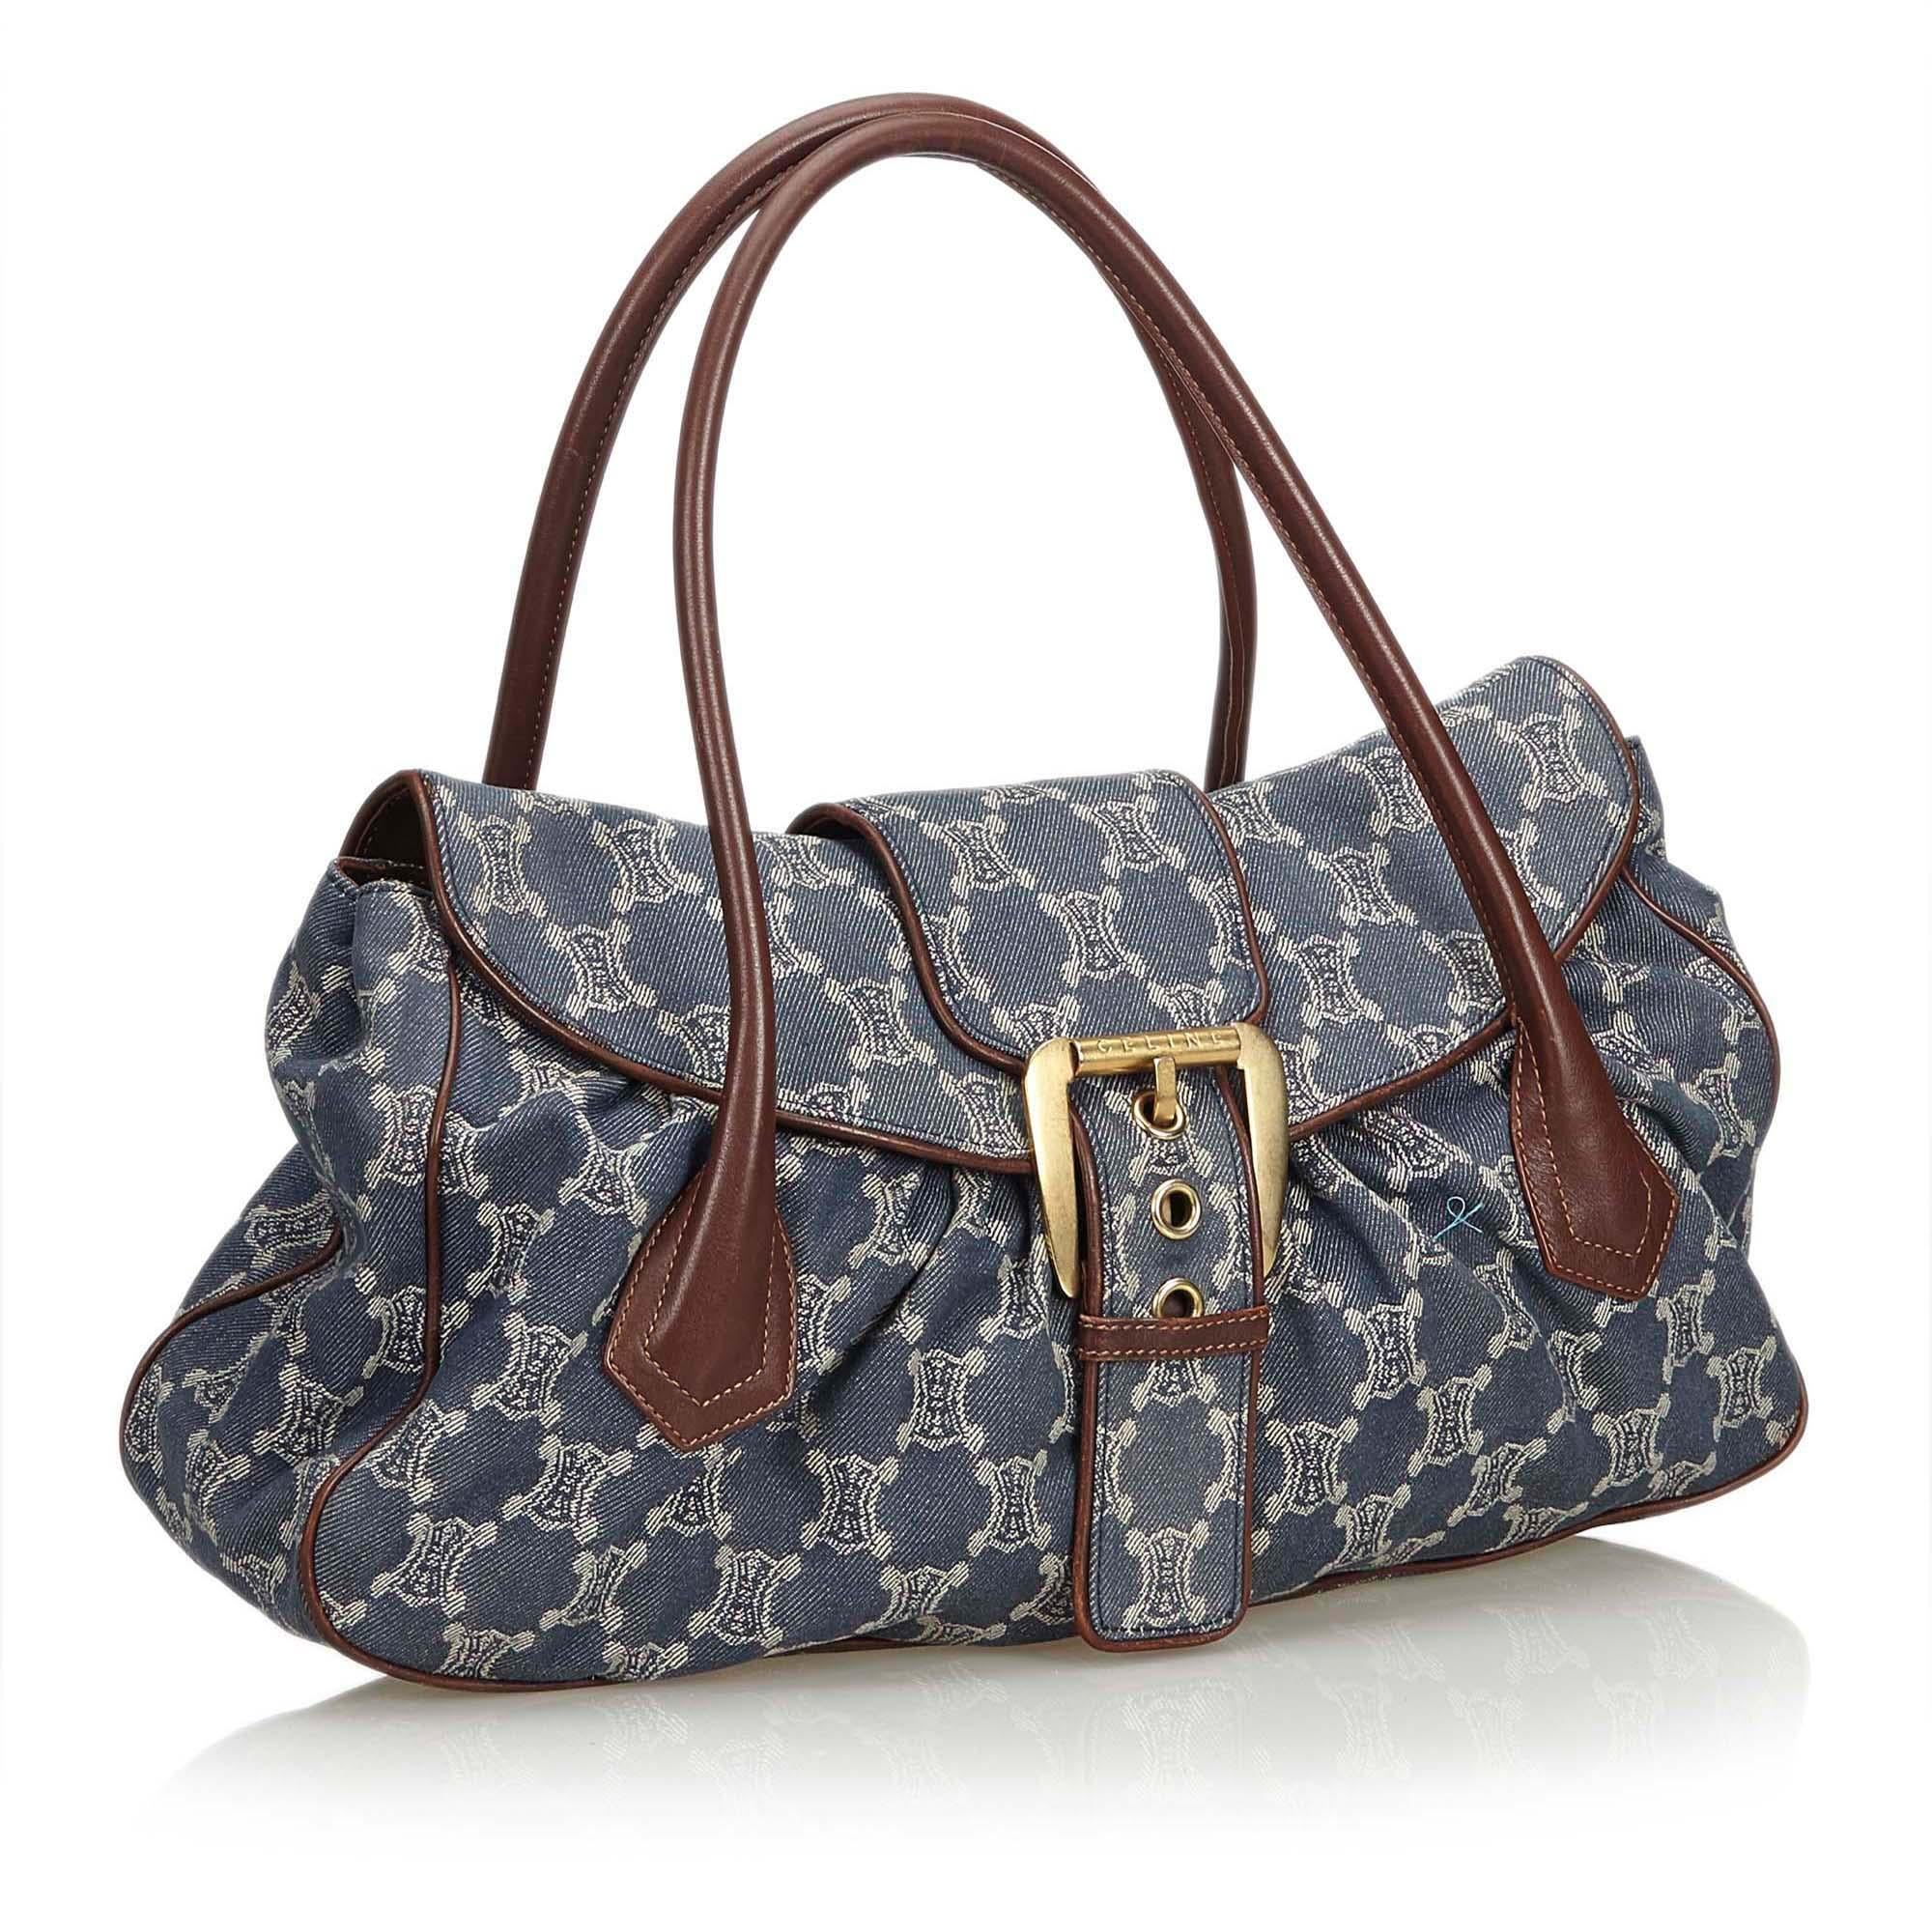 This shoulder bag features a denim body, exterior flap pockets with magnetic closures, flat shoulder straps, a top zip closure, and an interior zip pocket. It carries as B+ condition rating.

Inclusions: 
This item does not come with